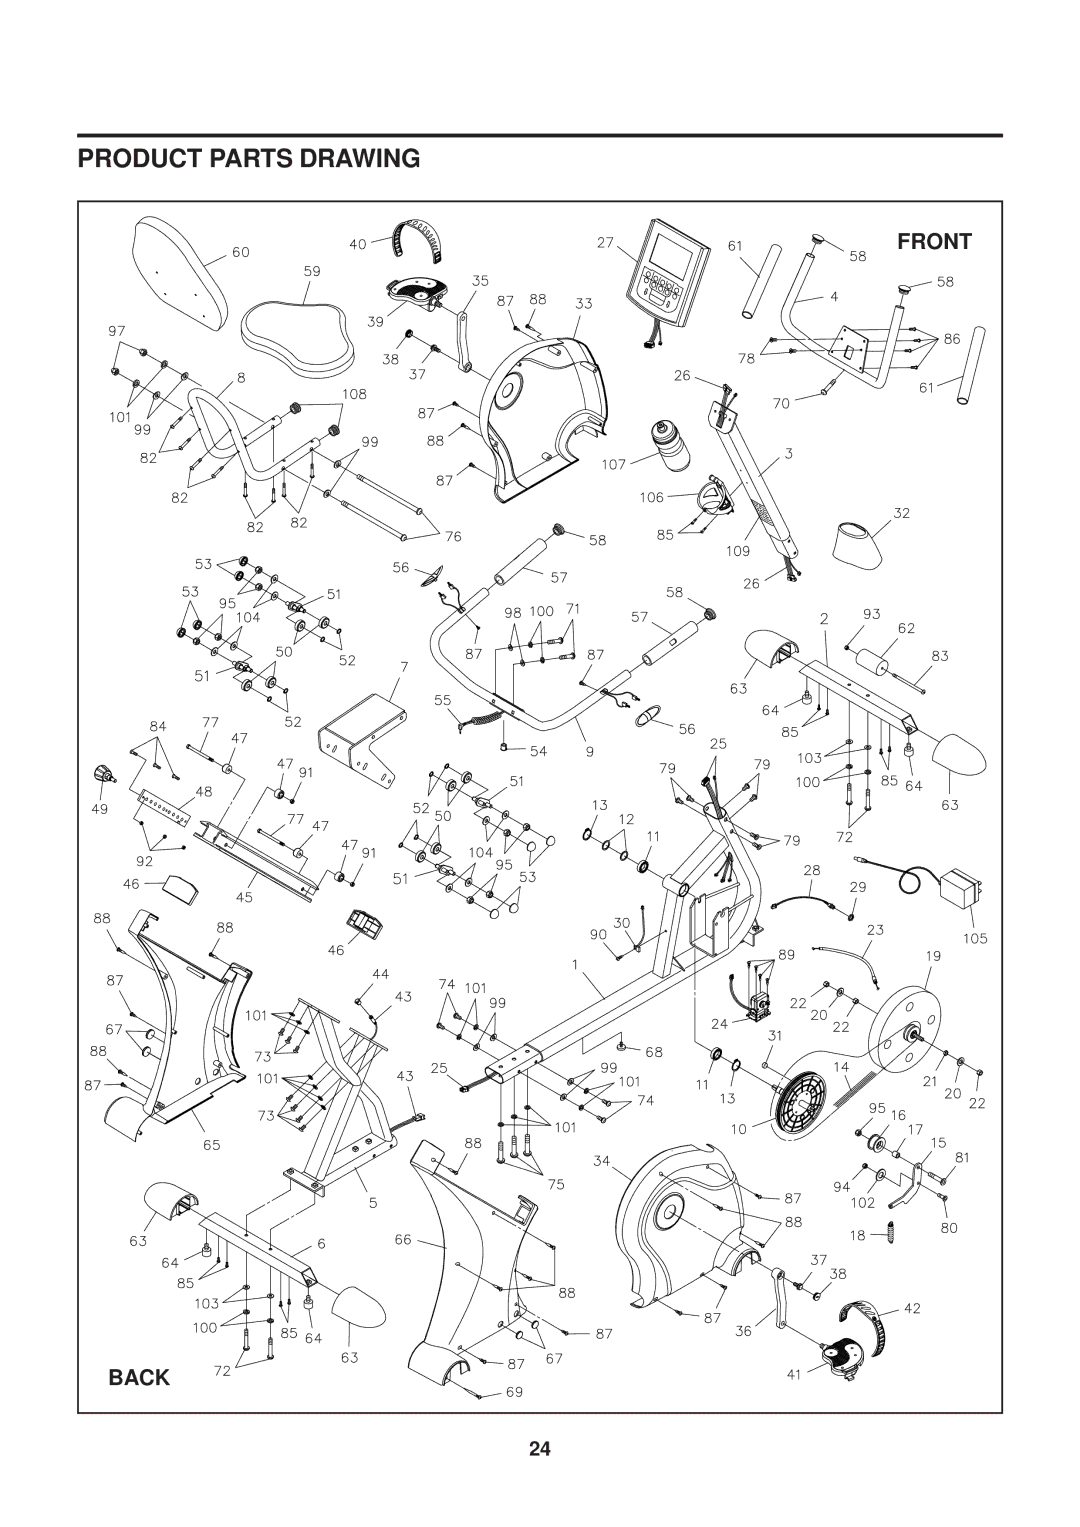 Stamina Products 15-7250 owner manual Product Parts Drawing, Front 